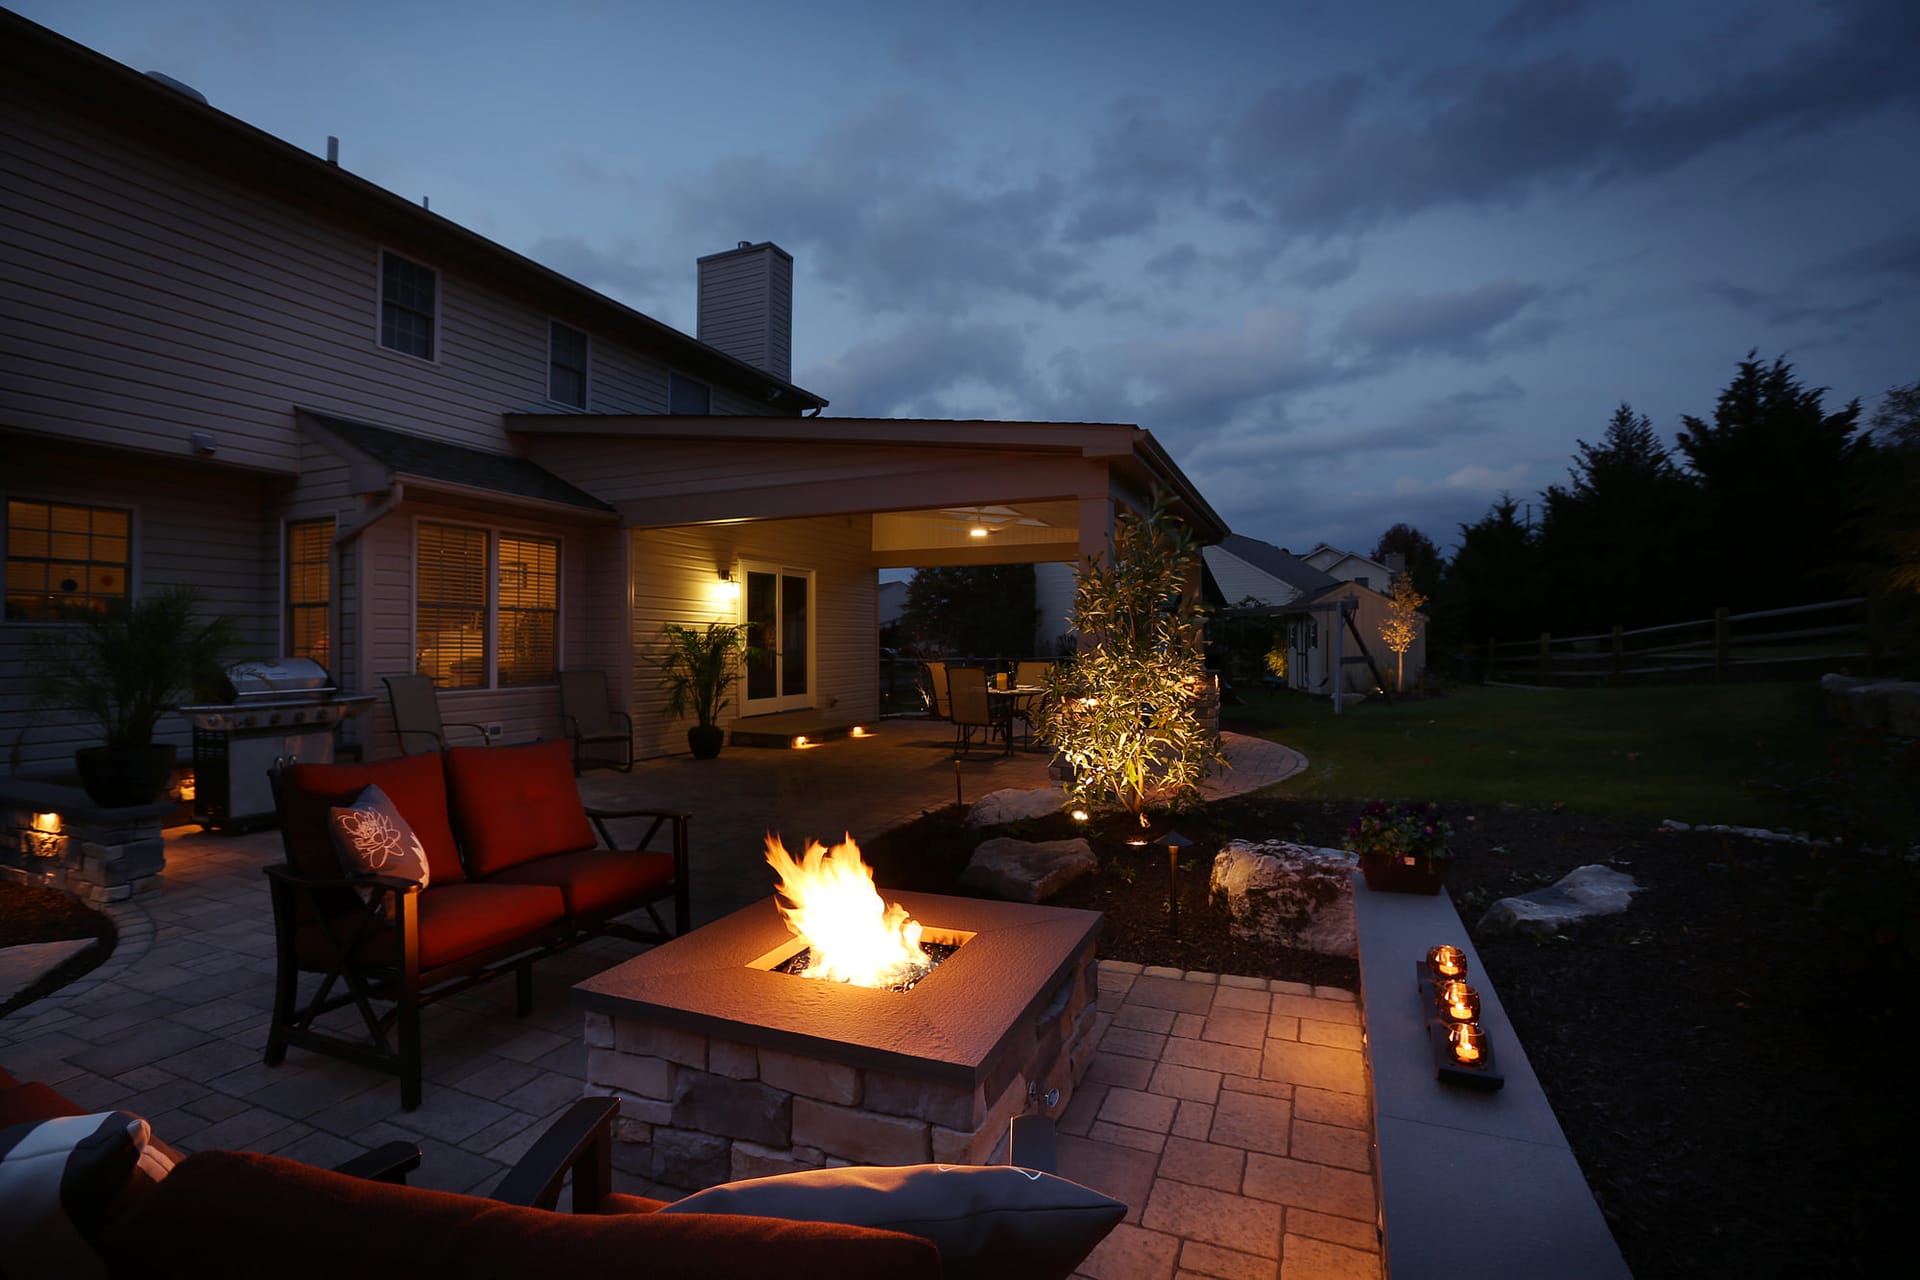 Can you picture your family gathering around this fire after the sun sets?